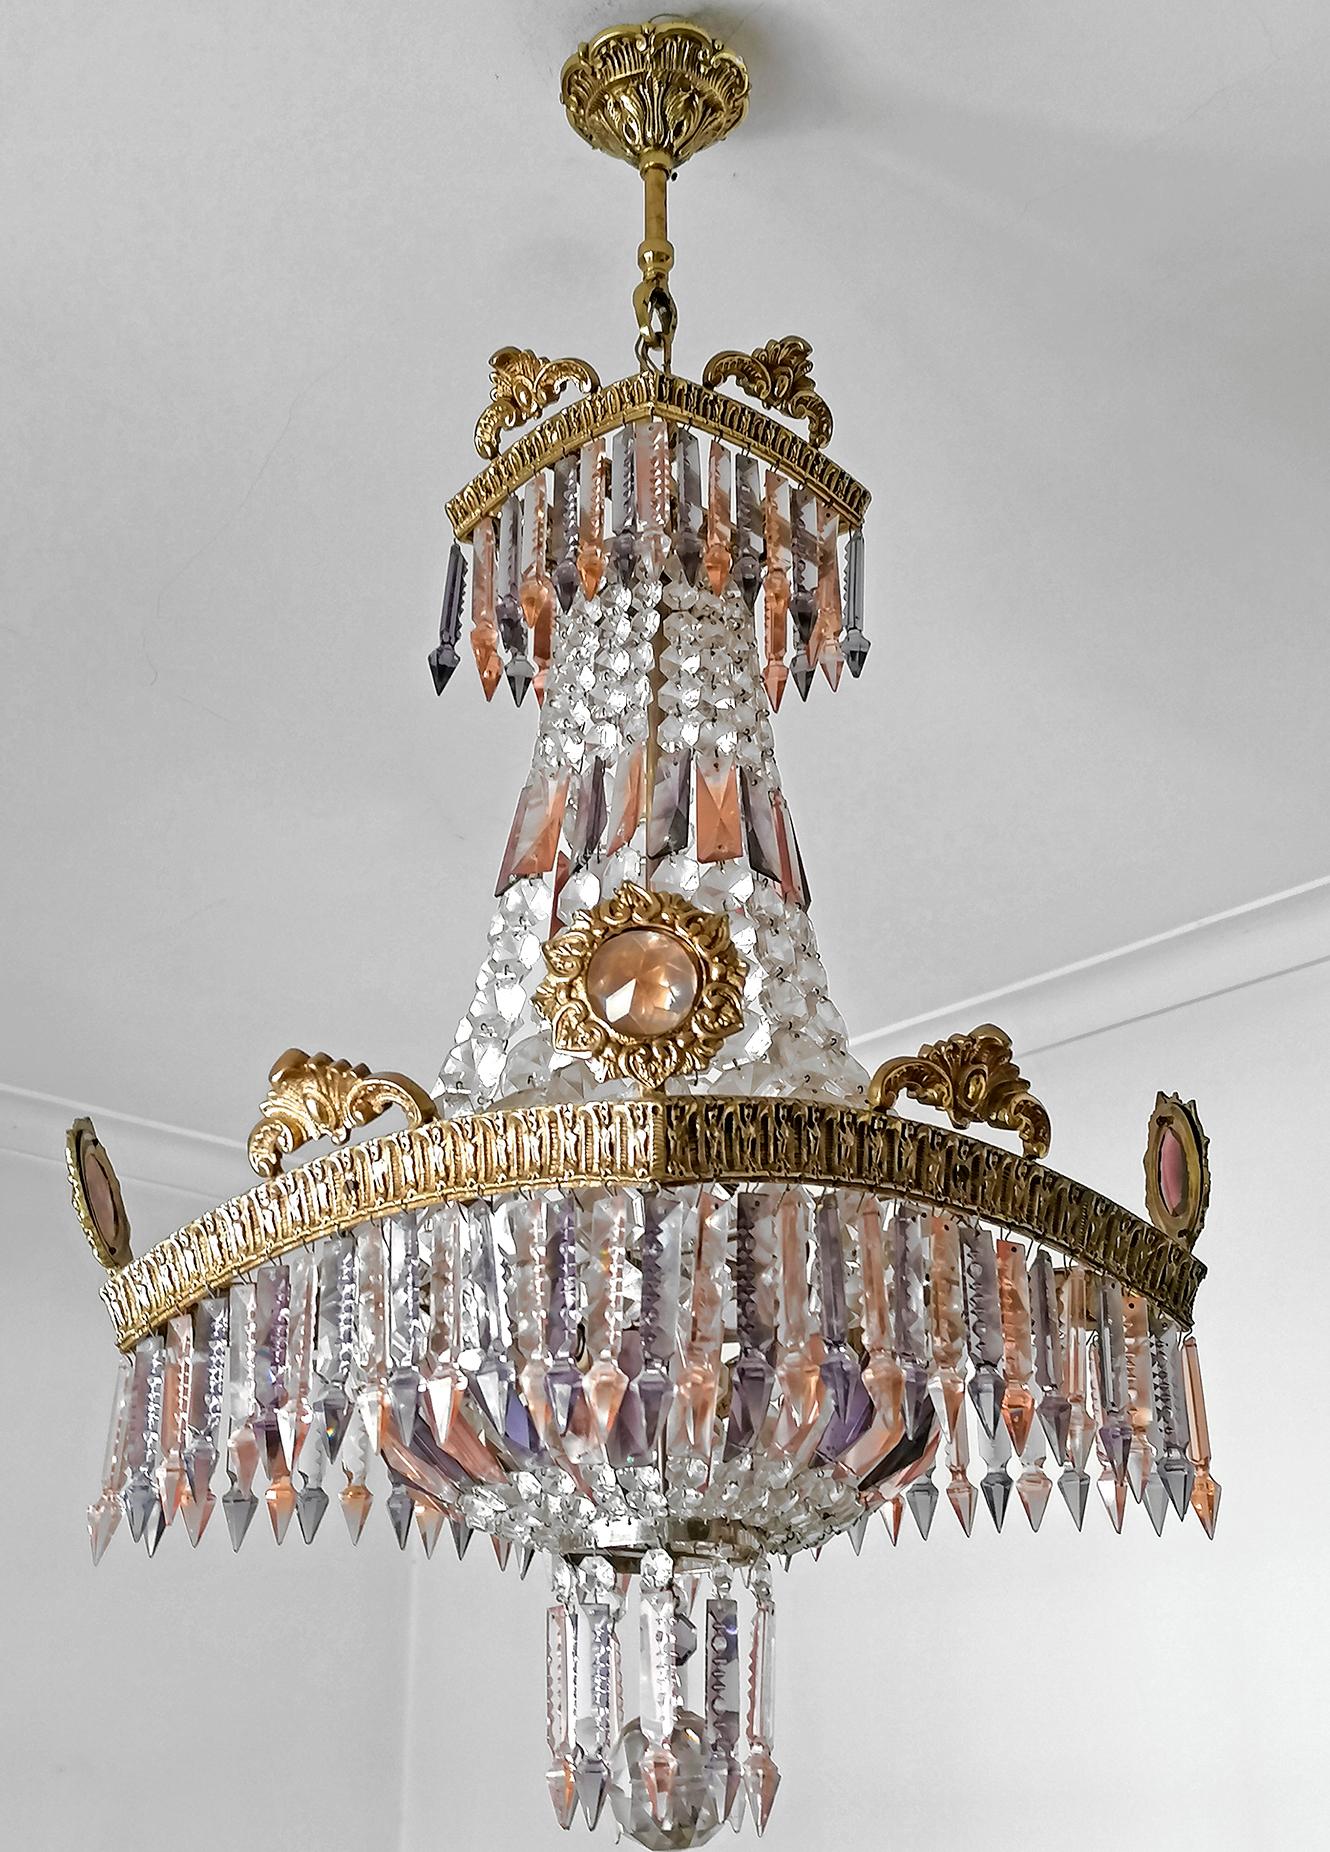 Fabulous French Empire pure crystal basket chandelier with gilt bronze frame. Early 20th Century
Dimensions
Width: 16.54 in. (42 cm)
Depth: 16.54 in. (42 cm)
Diagonal: 21.6 in/55 cm
Height Height: 39.38 in. ( 4 in chain) /(100 cm /10 cm